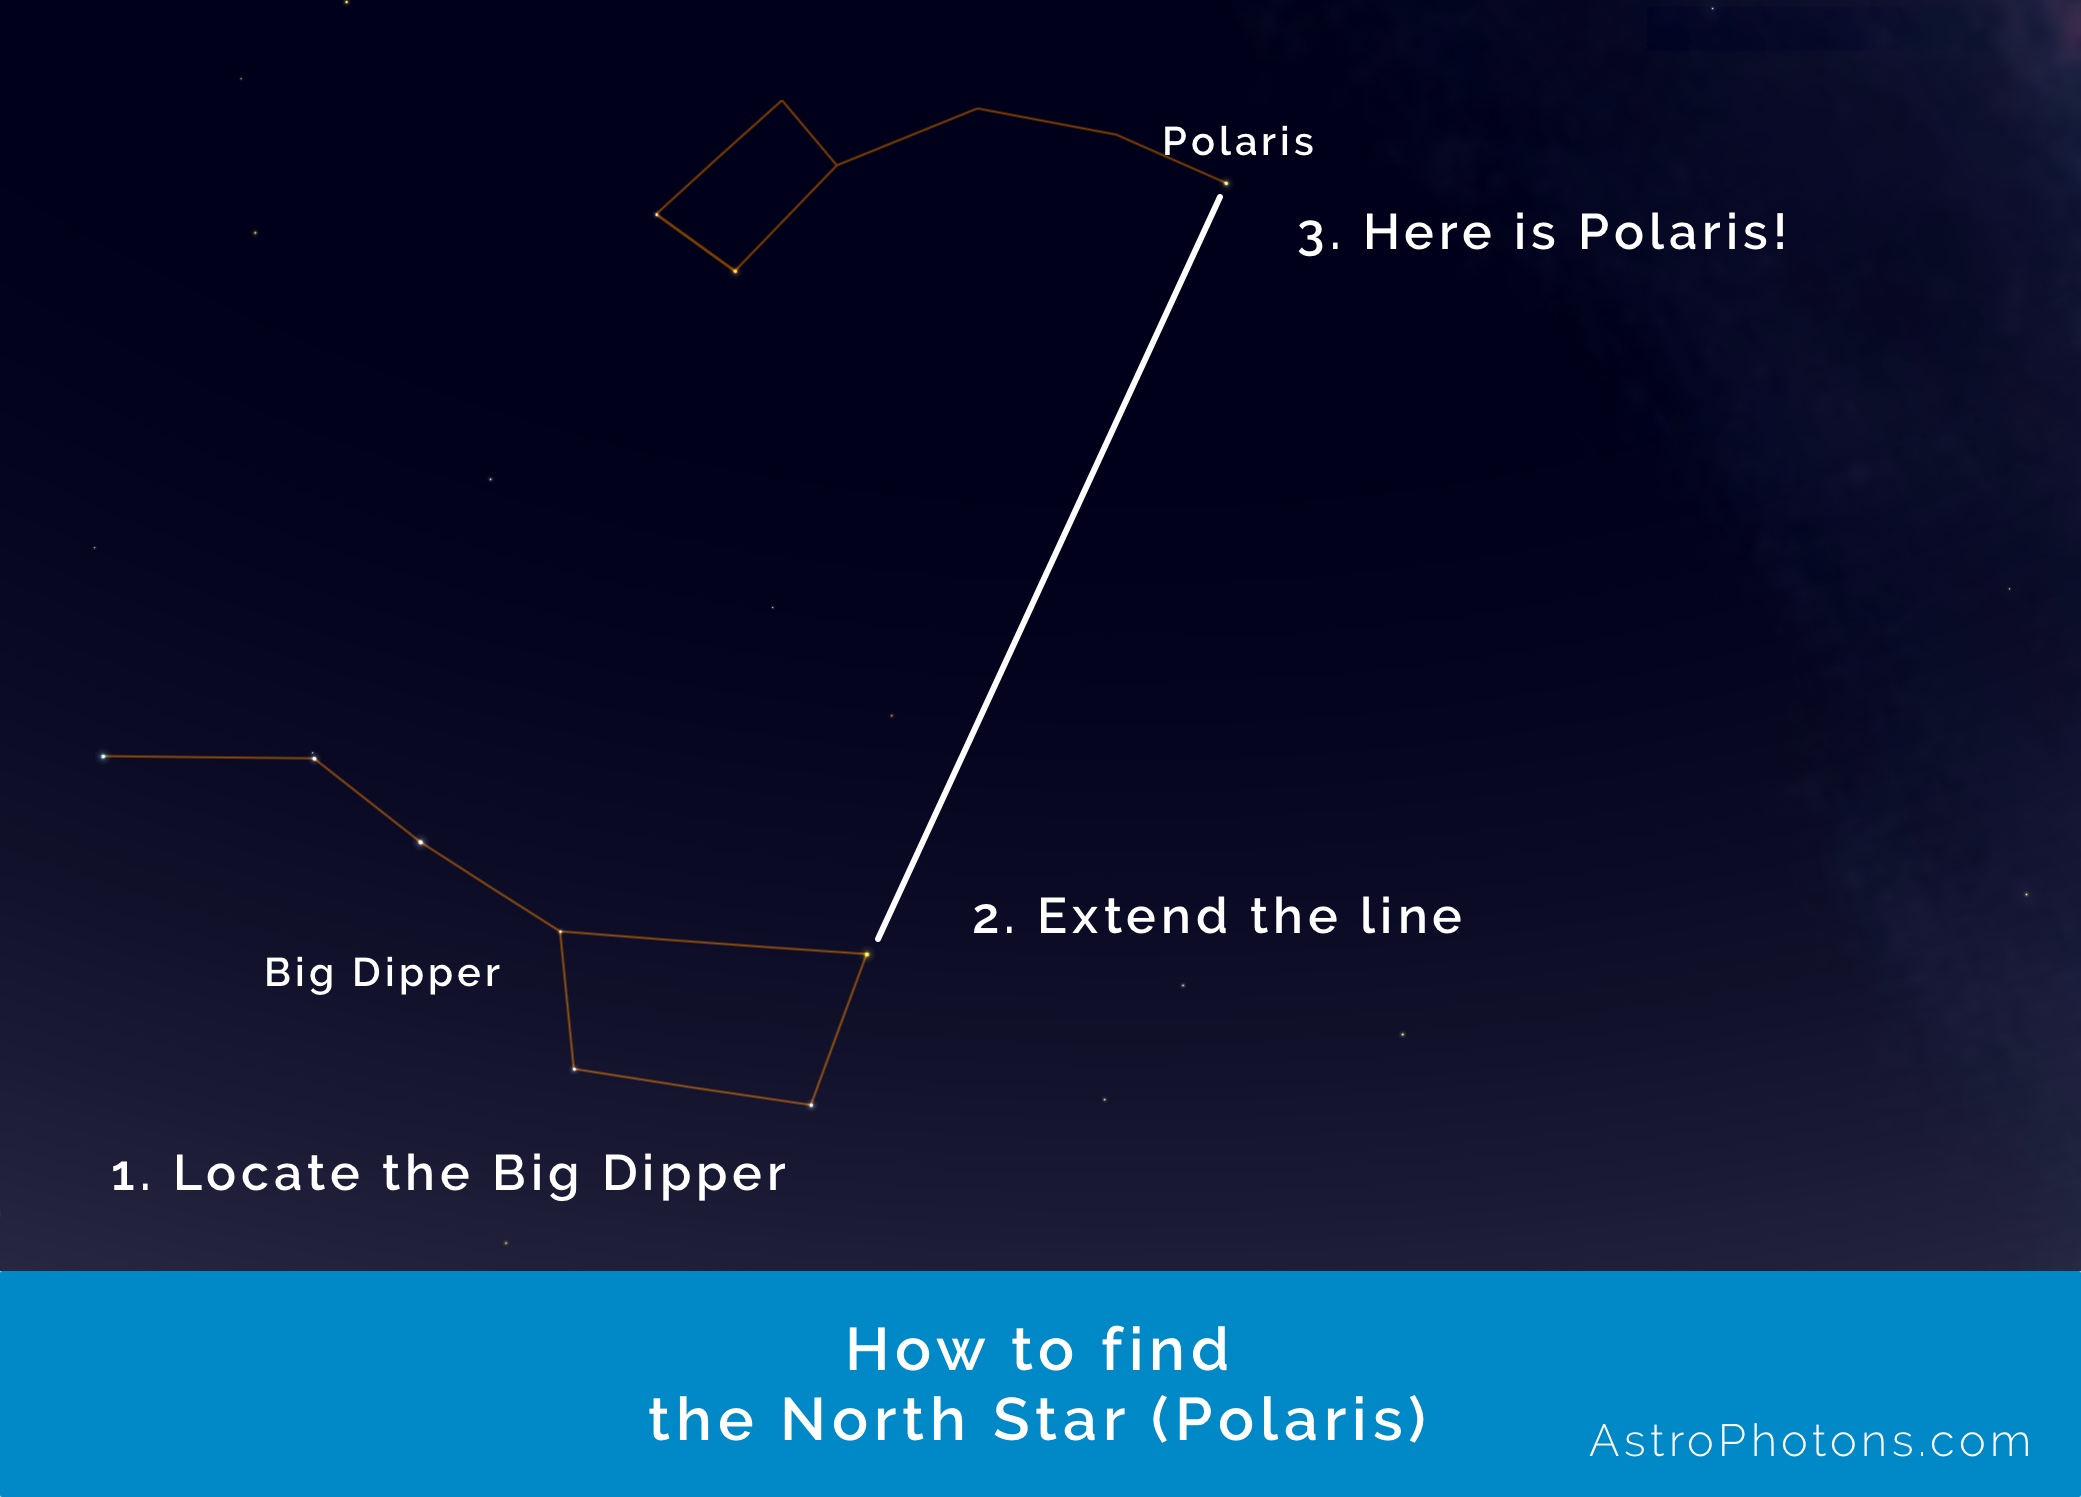 How to find the North Star (Polaris)